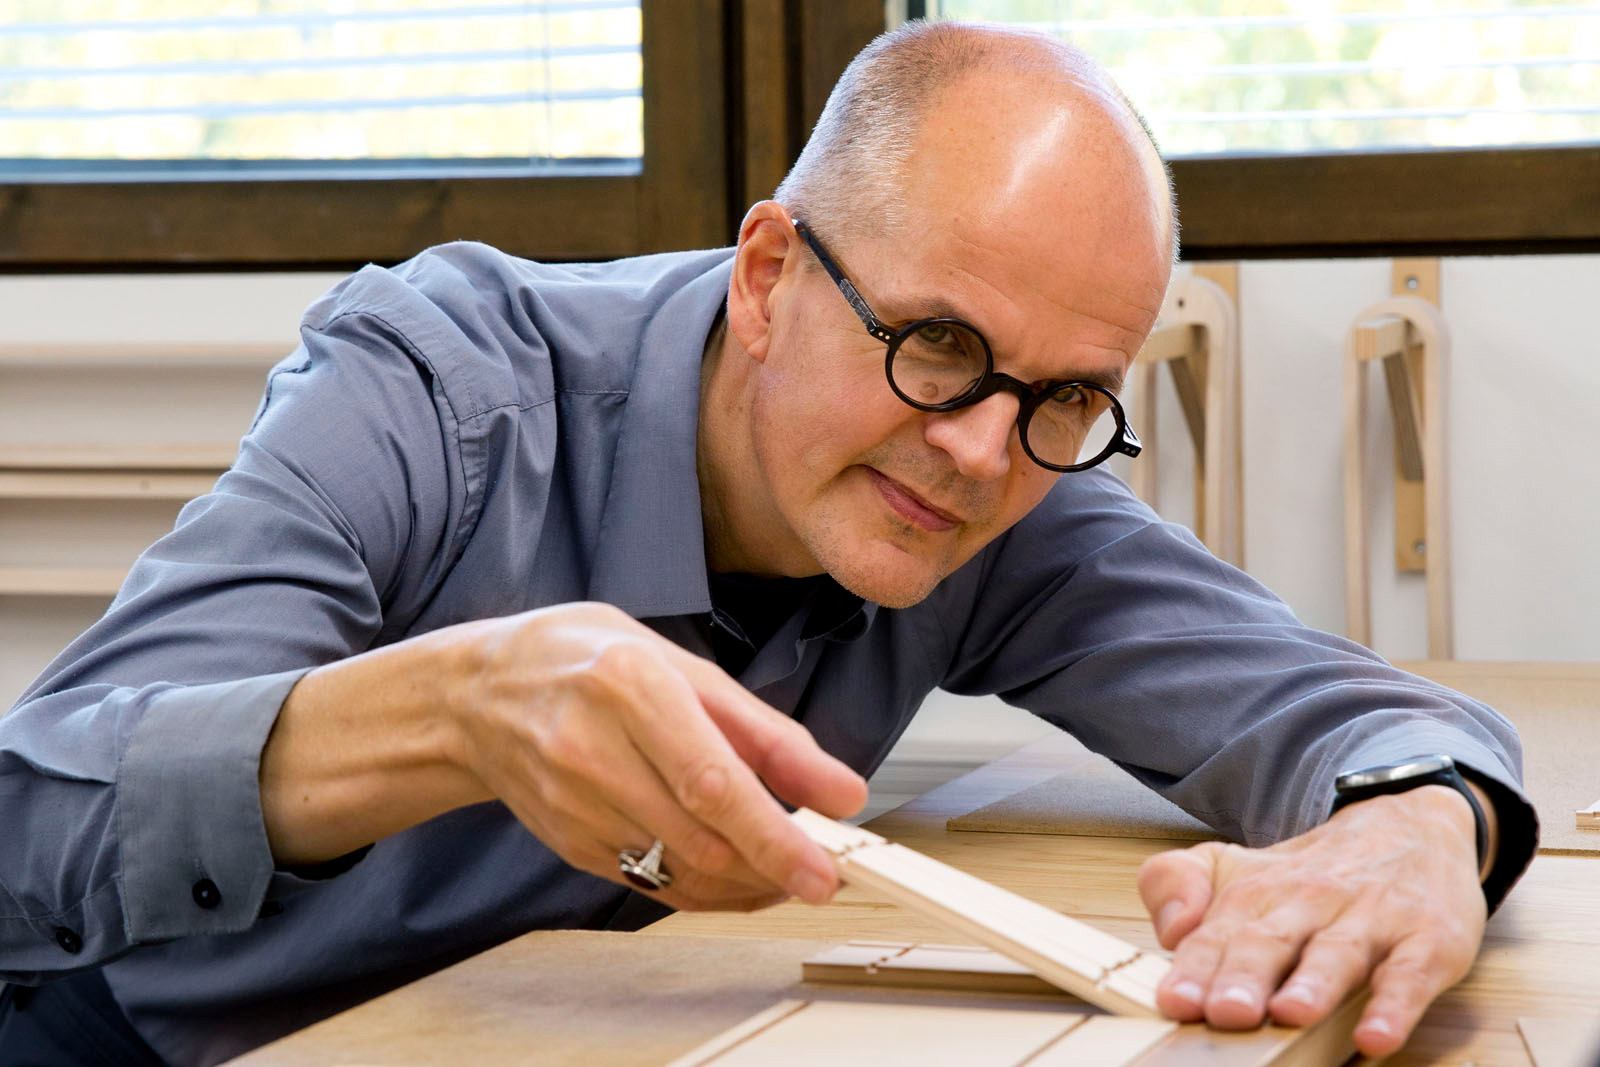 A smiling man wearing black round glasses and a blue shirt, focused on setting small slats on the jig.